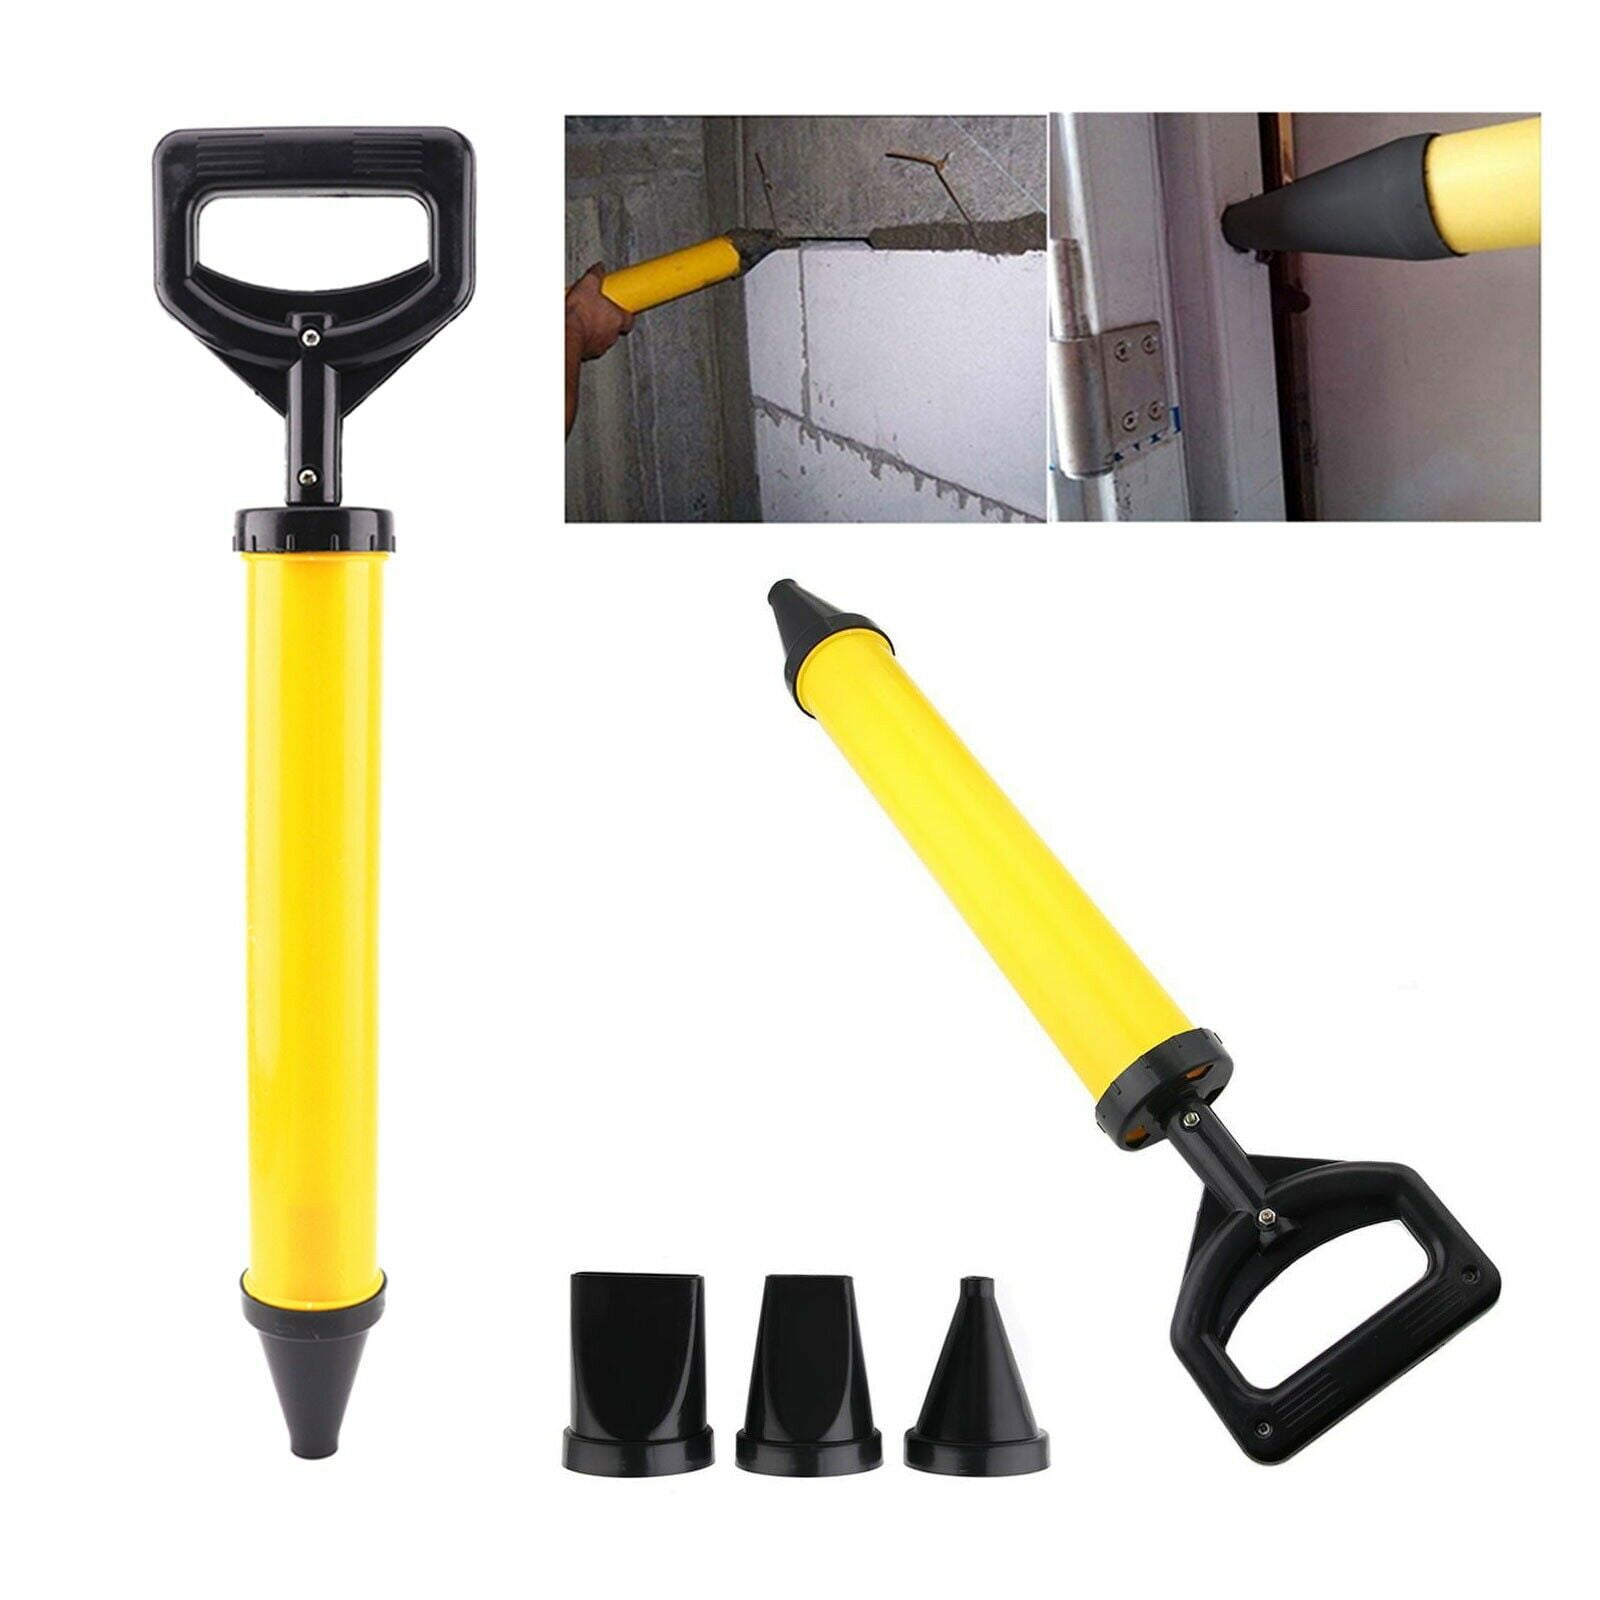 Mortar Gun for Brick Pointing Grouting Cement Lime Applicator Tool w/ 4 Nozzles 